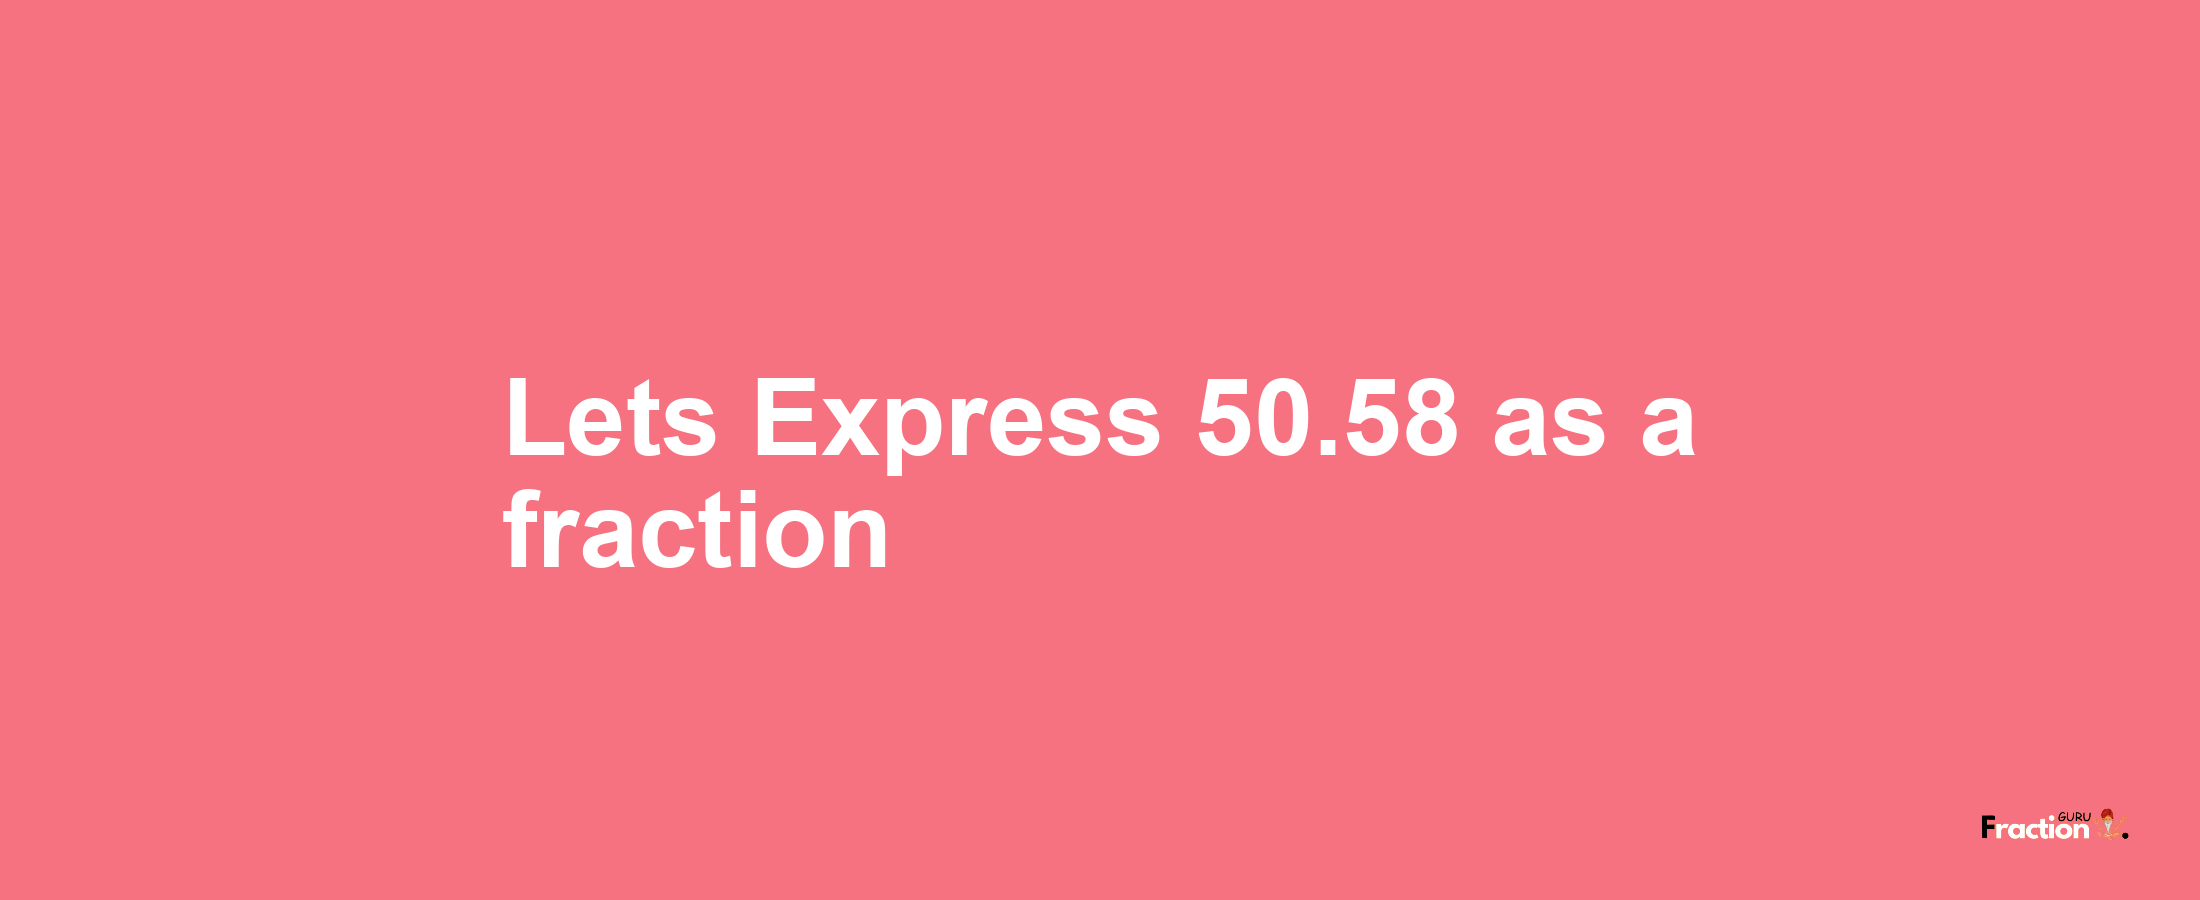 Lets Express 50.58 as afraction